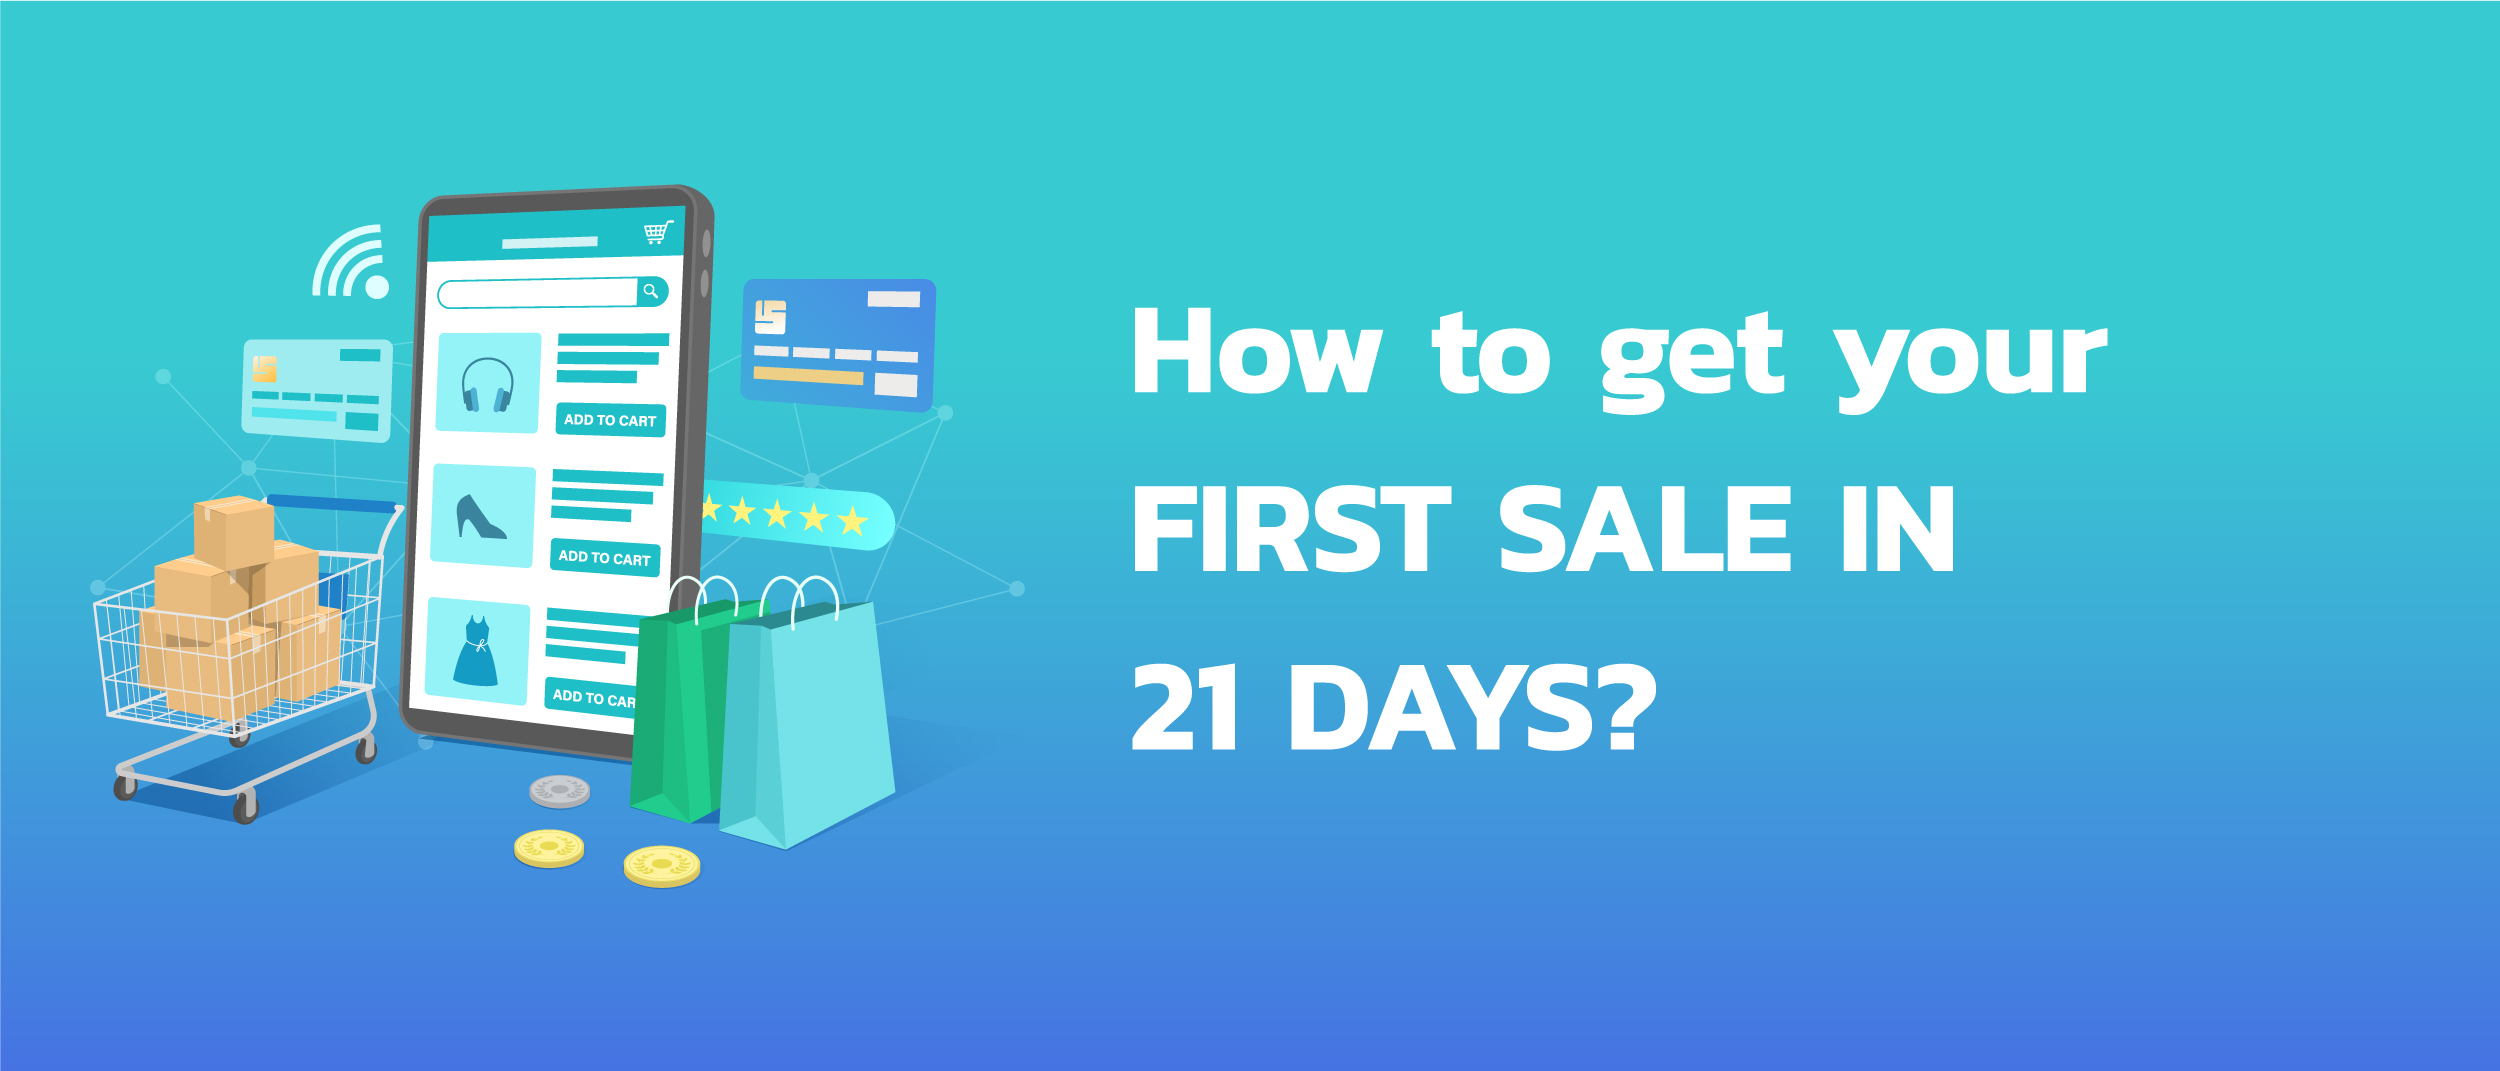 how to get your first sale in 21 days